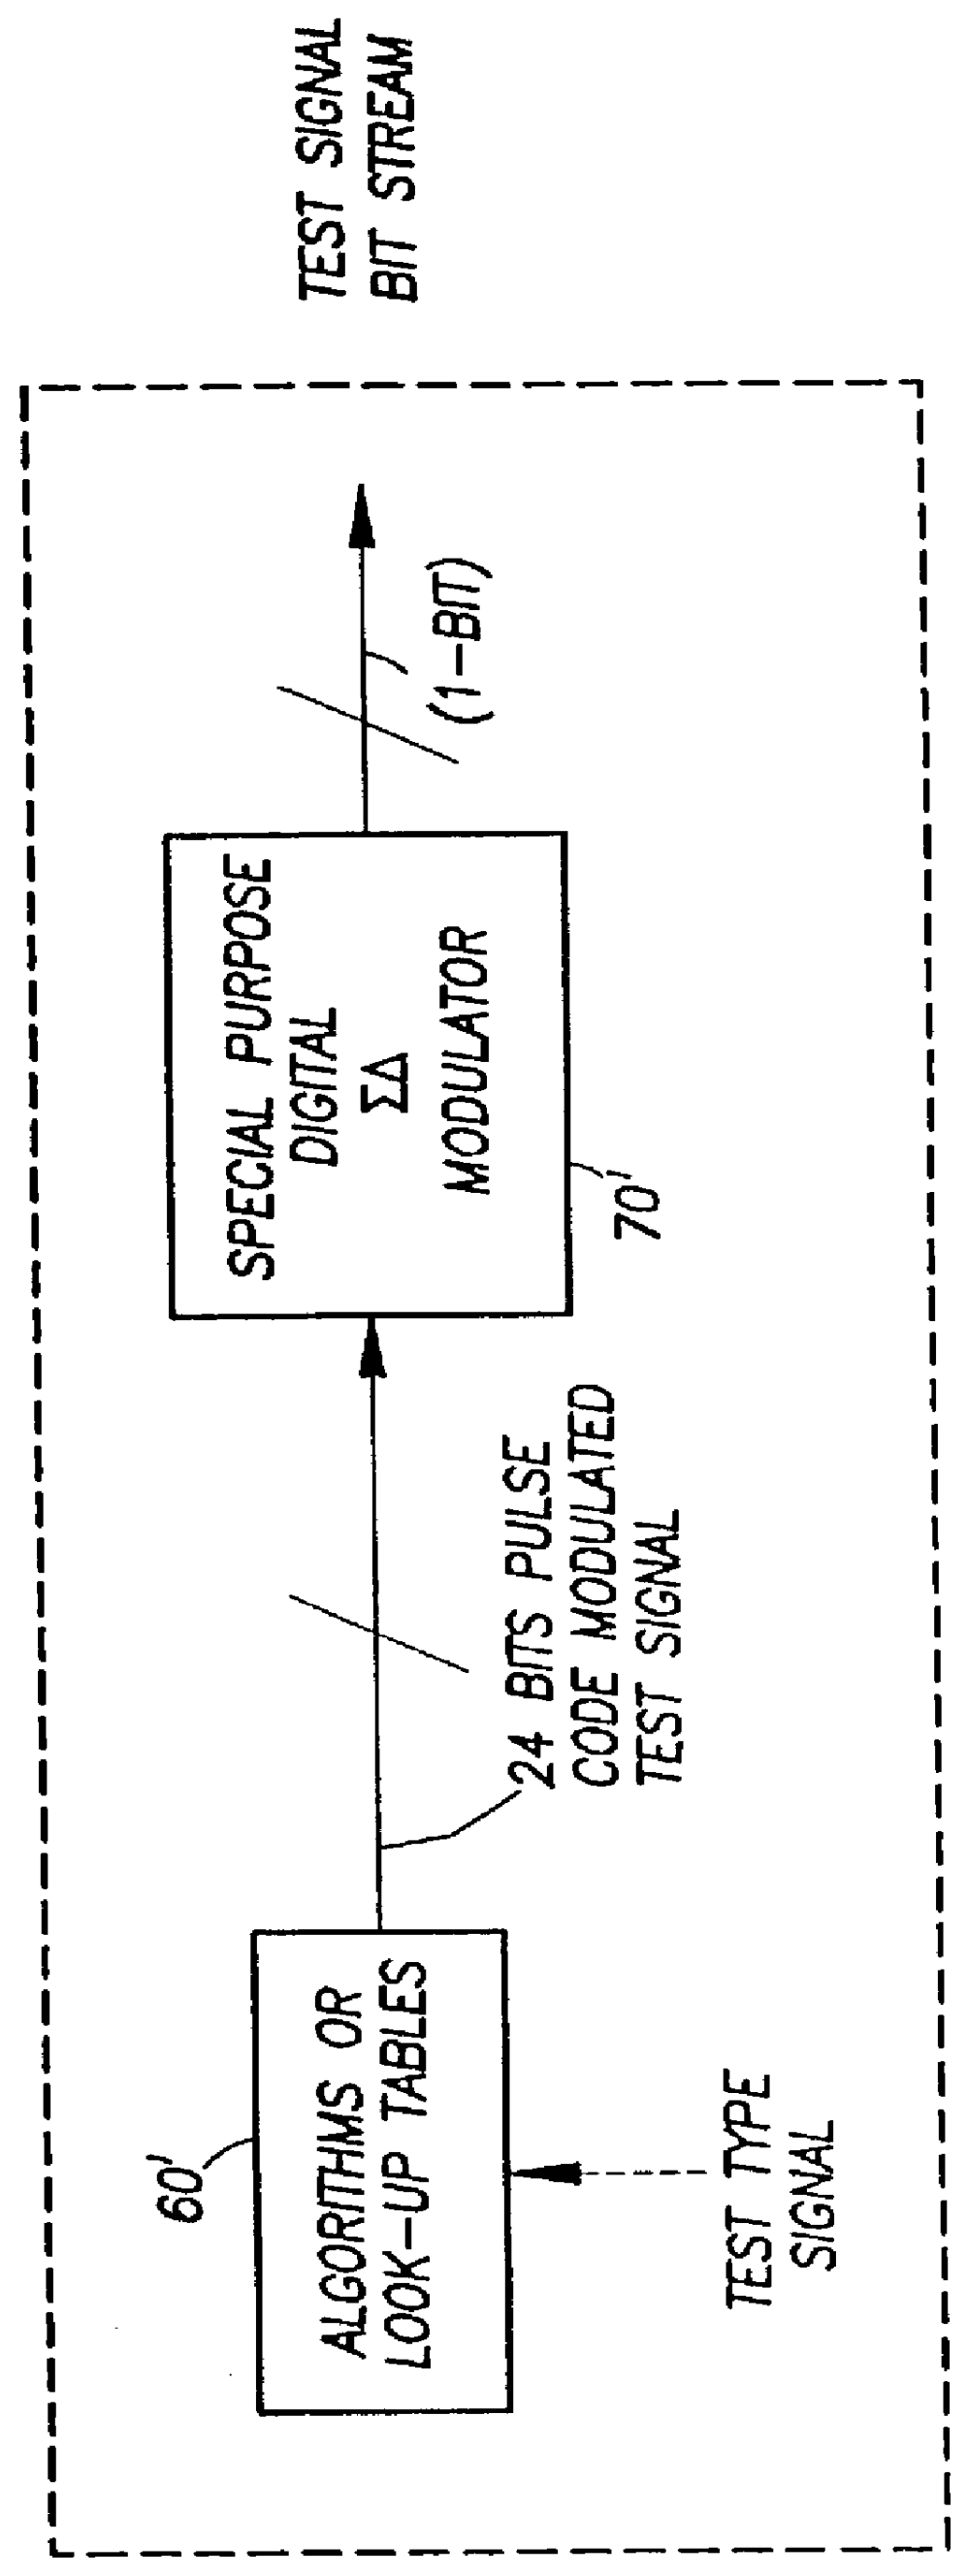 Method and apparatus for generation of test bitstreams and testing of close loop transducers